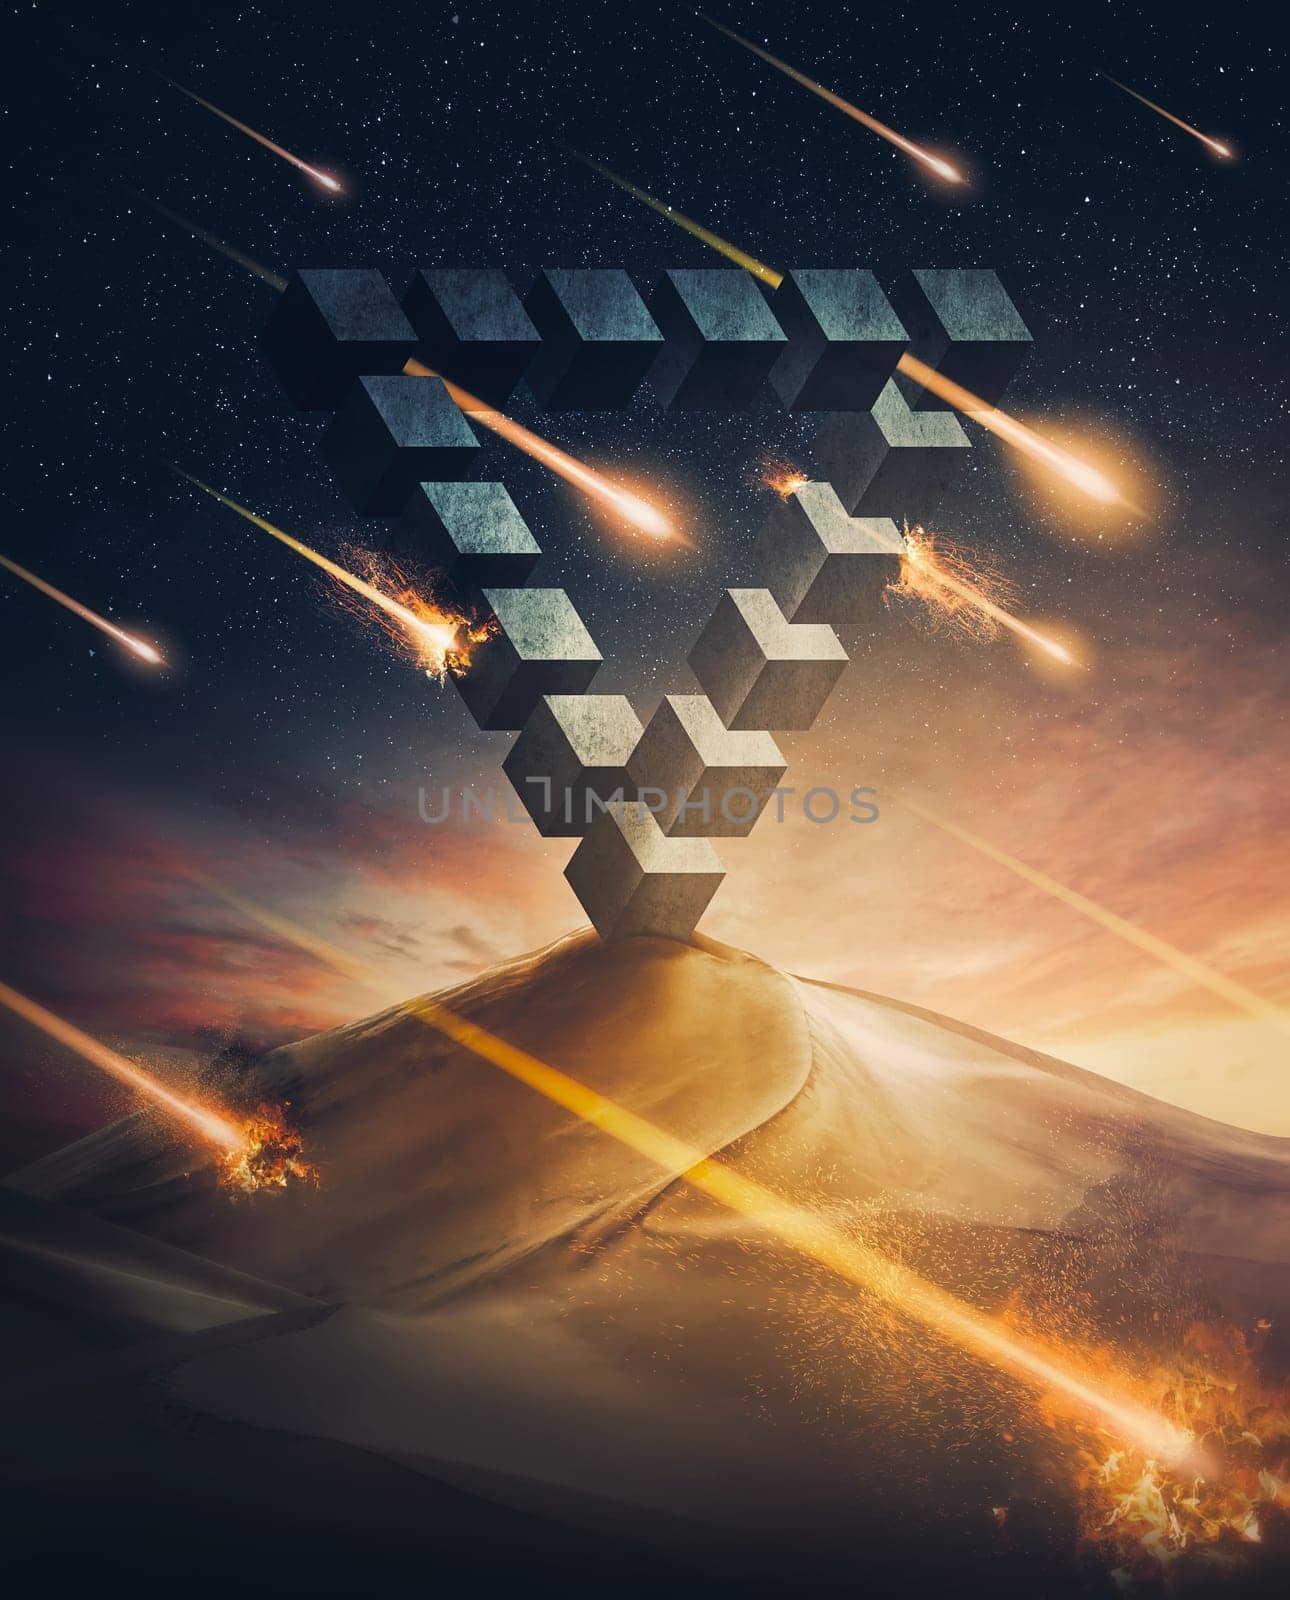 Meteor shower falling on another planet on a faraway galaxy. Abstract shape alien construction, penrose triangle shape, in the middle of a desert bombarded by comets. Surreal cosmic background